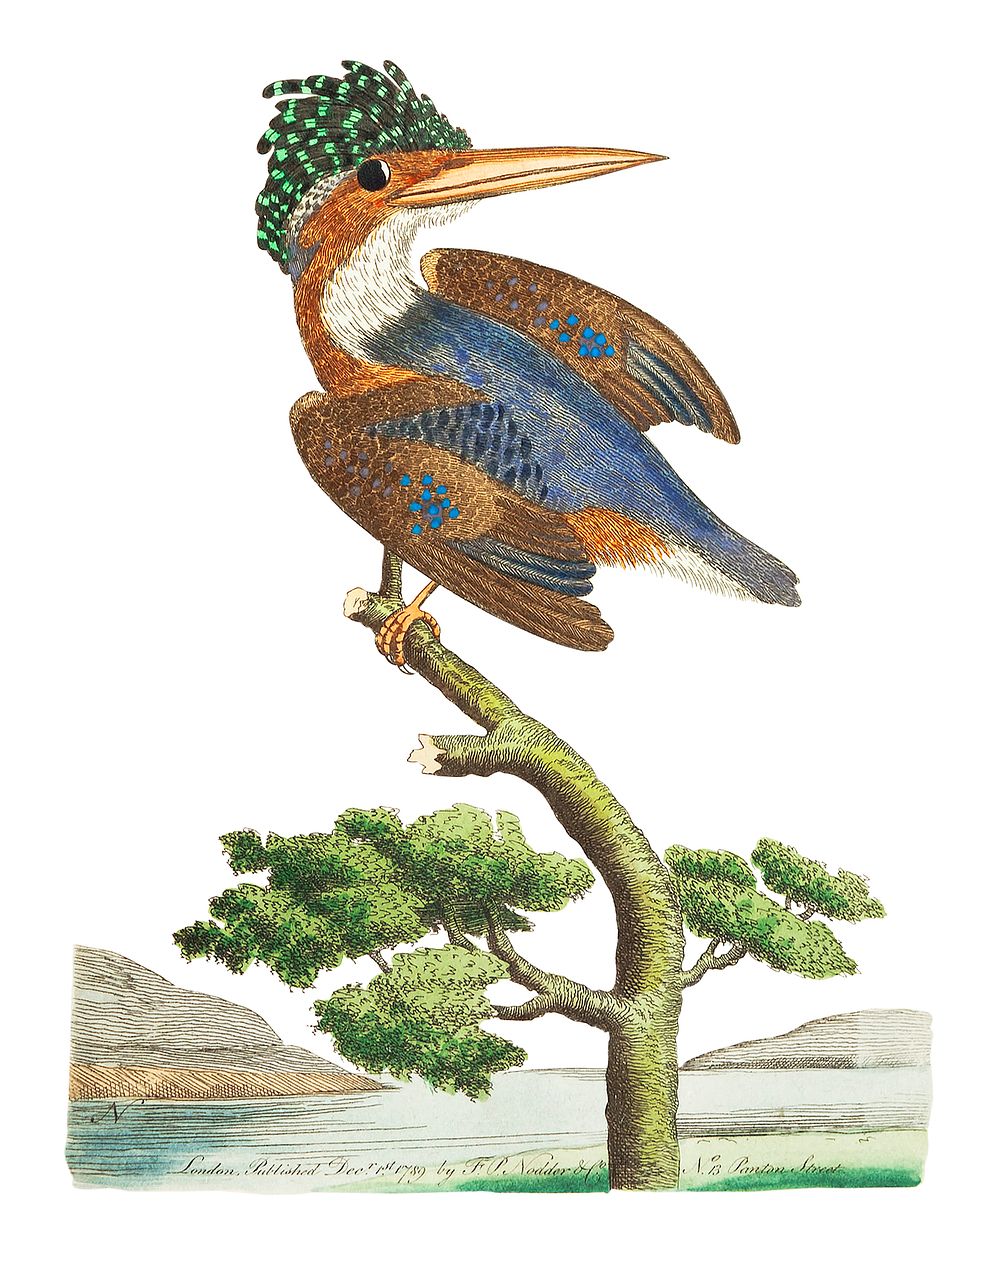 Crested Kingfisher illustration from The Naturalist's Miscellany (1789-1813) by George Shaw (1751-1813)